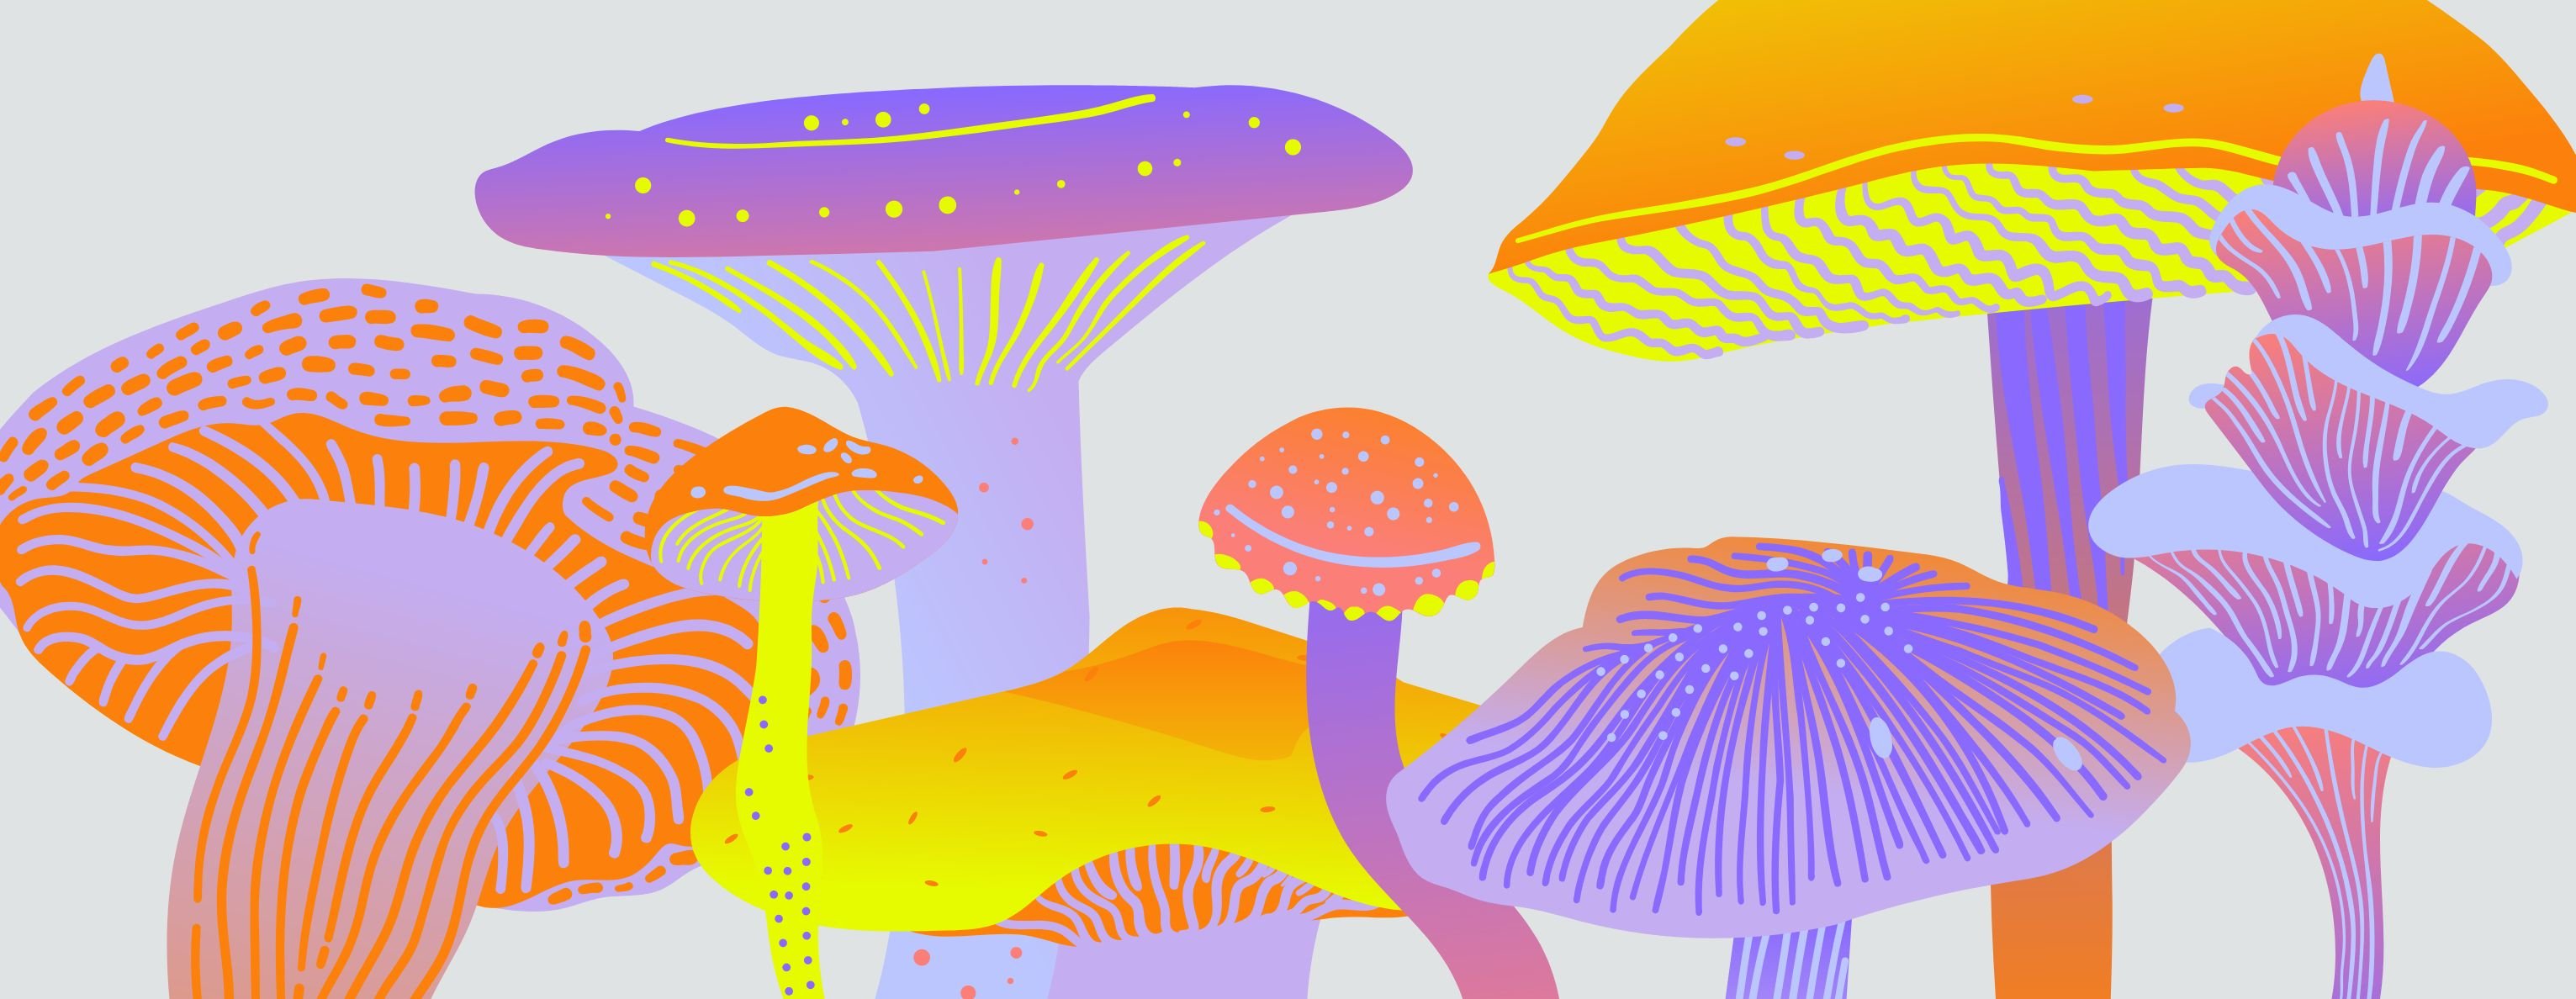 Improving Energy with Mushrooms